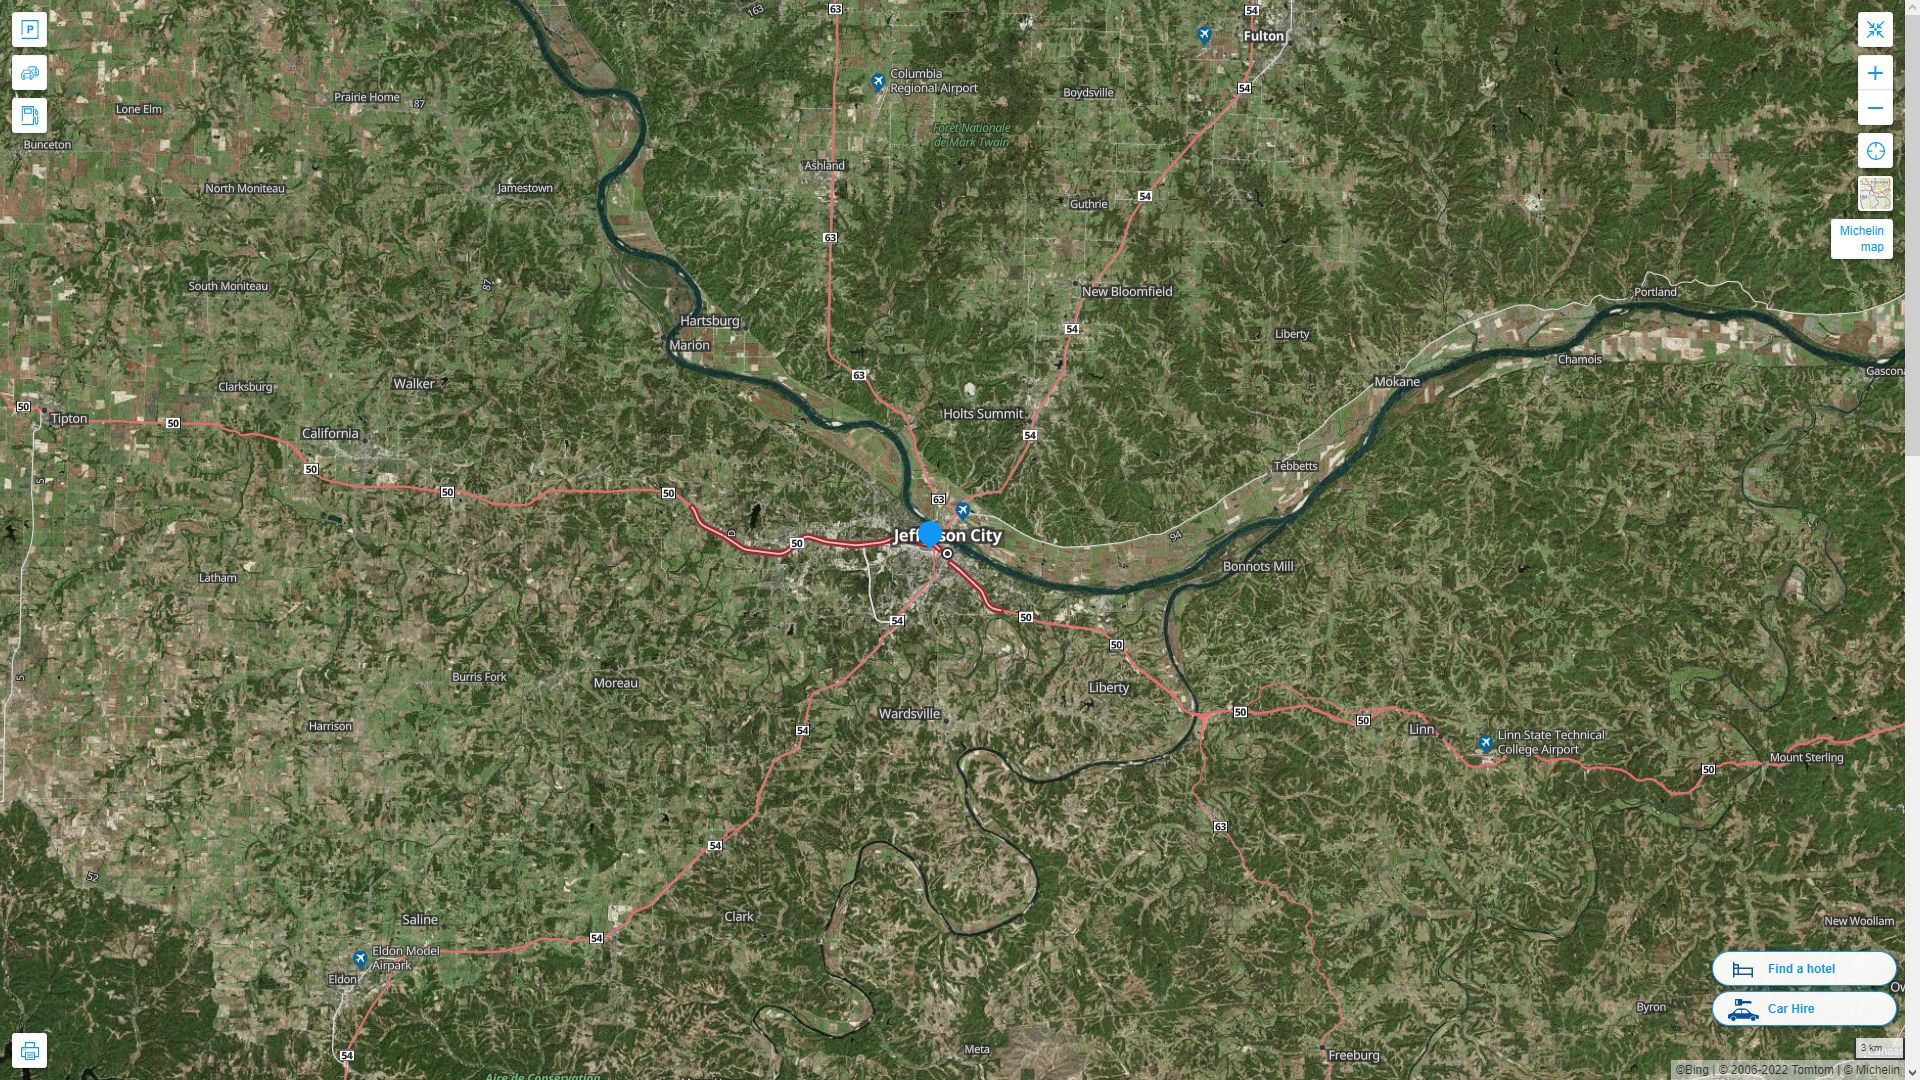 Jefferson City Missouri Highway and Road Map with Satellite View